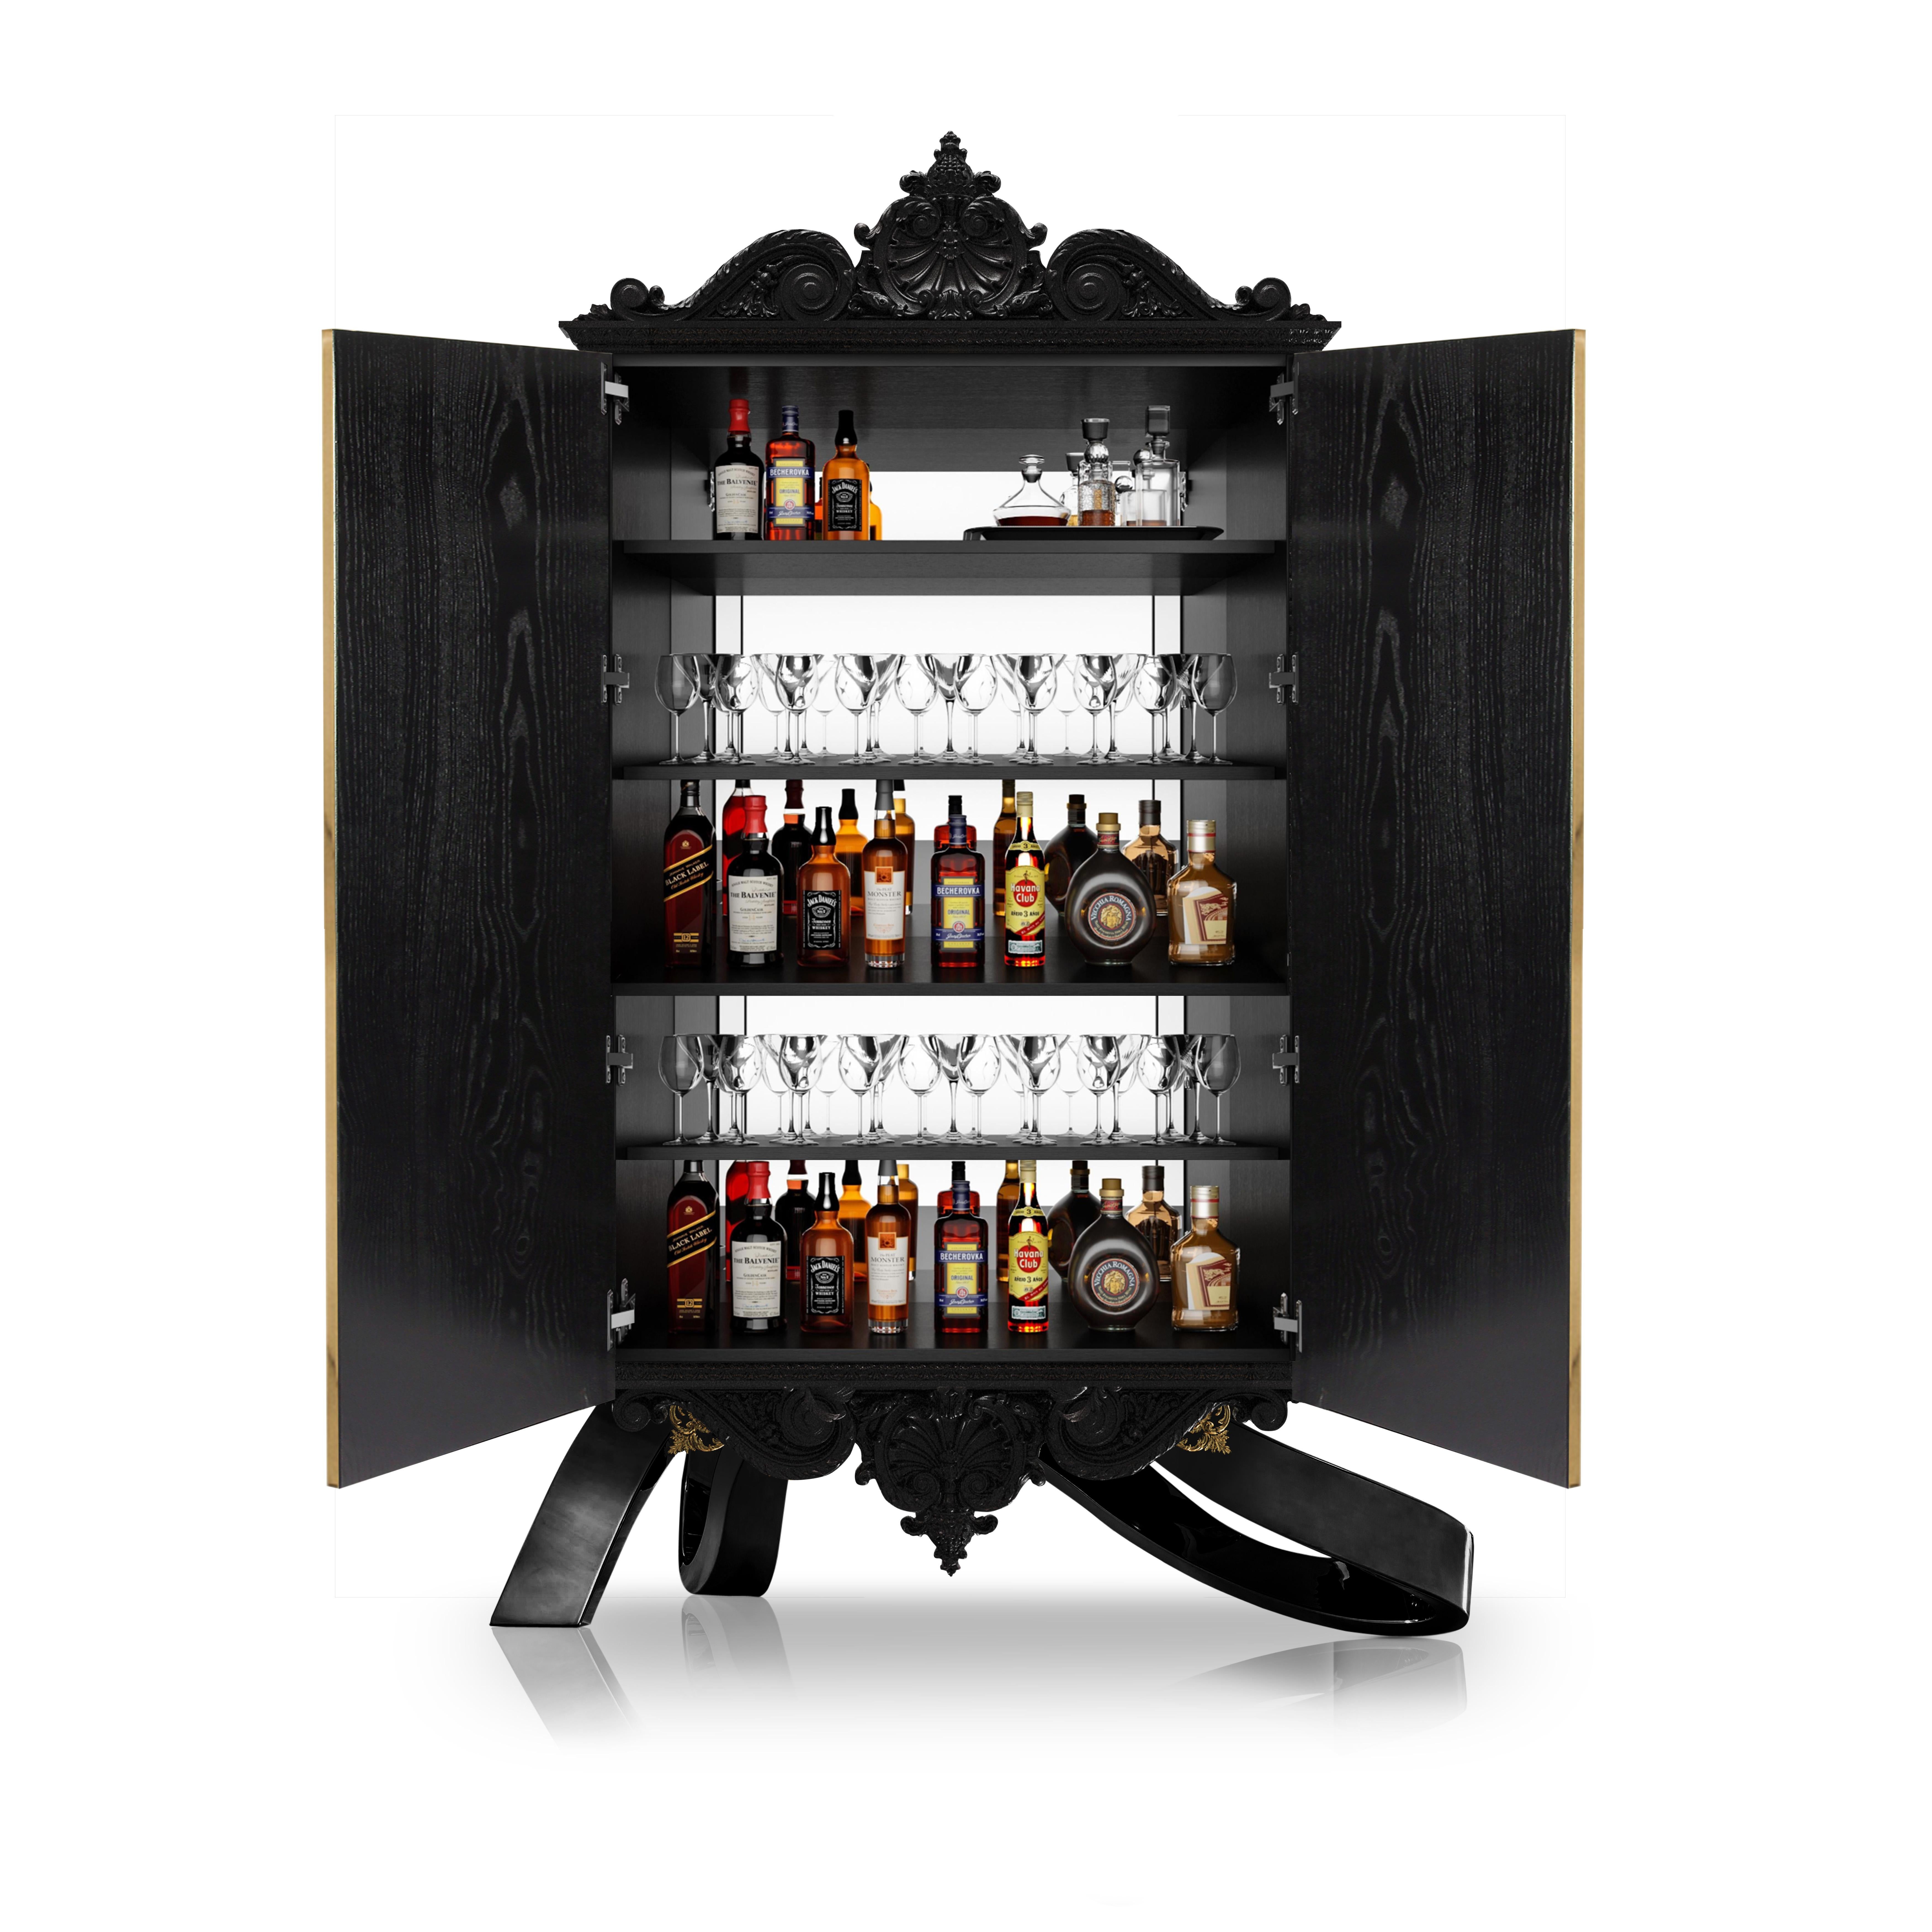 The Icarus drinks cabinet is a truly stunning statement for any room in the house. Striking in any setting, the ultimate in style and glamorous storage solutions. The perfect union of materials, a harmony of forms.

Designed by Railis Kotlevs in